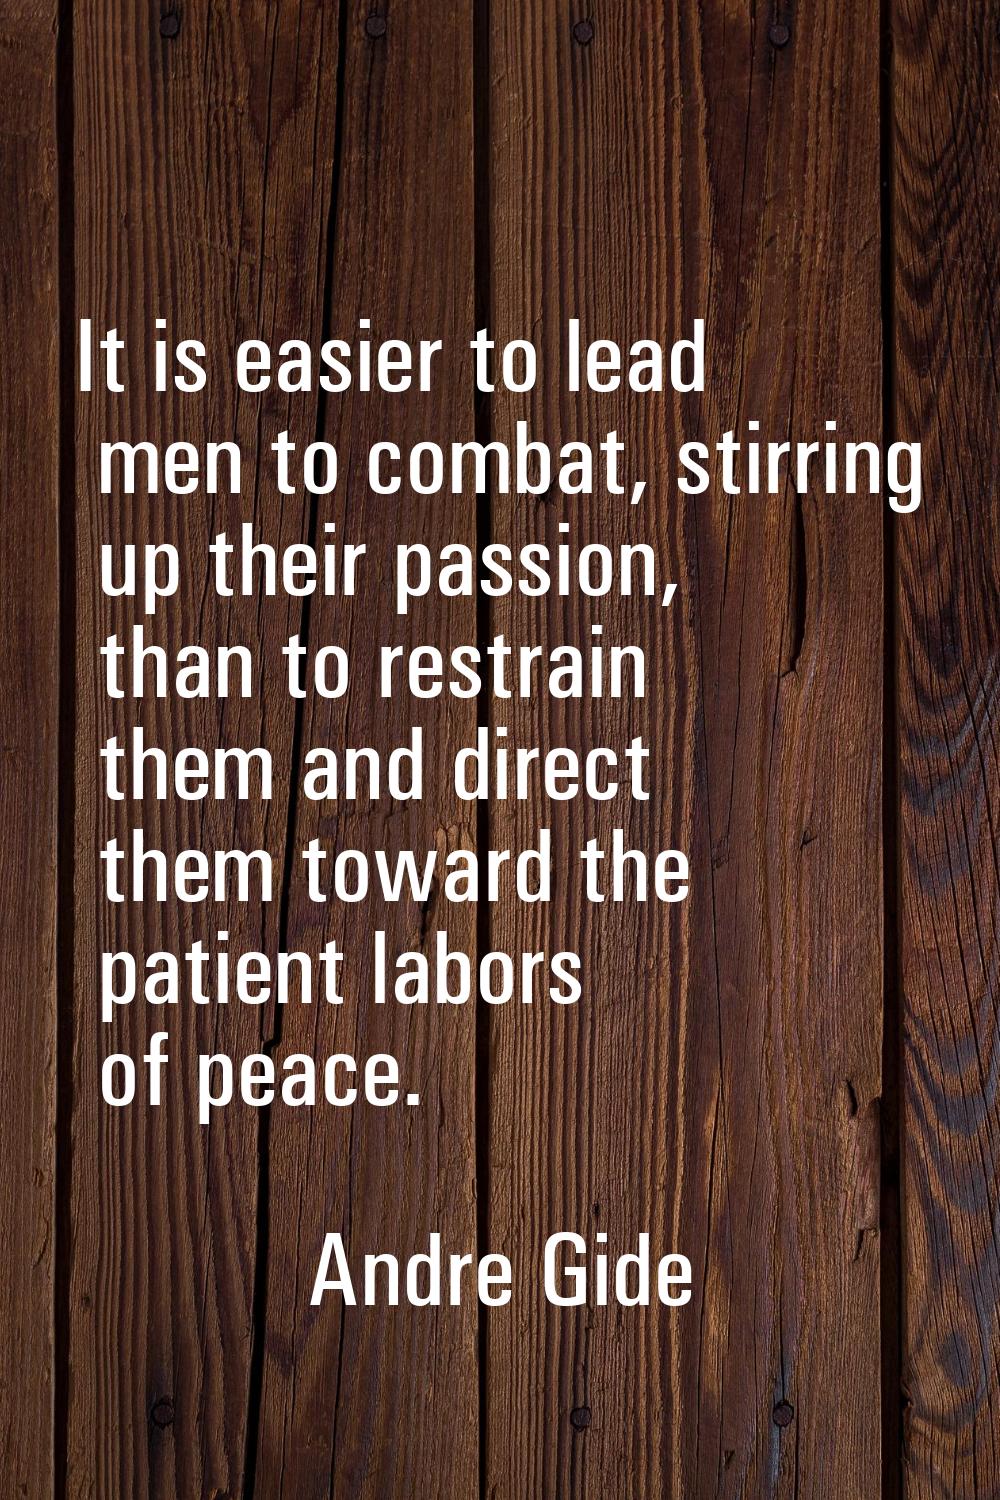 It is easier to lead men to combat, stirring up their passion, than to restrain them and direct the